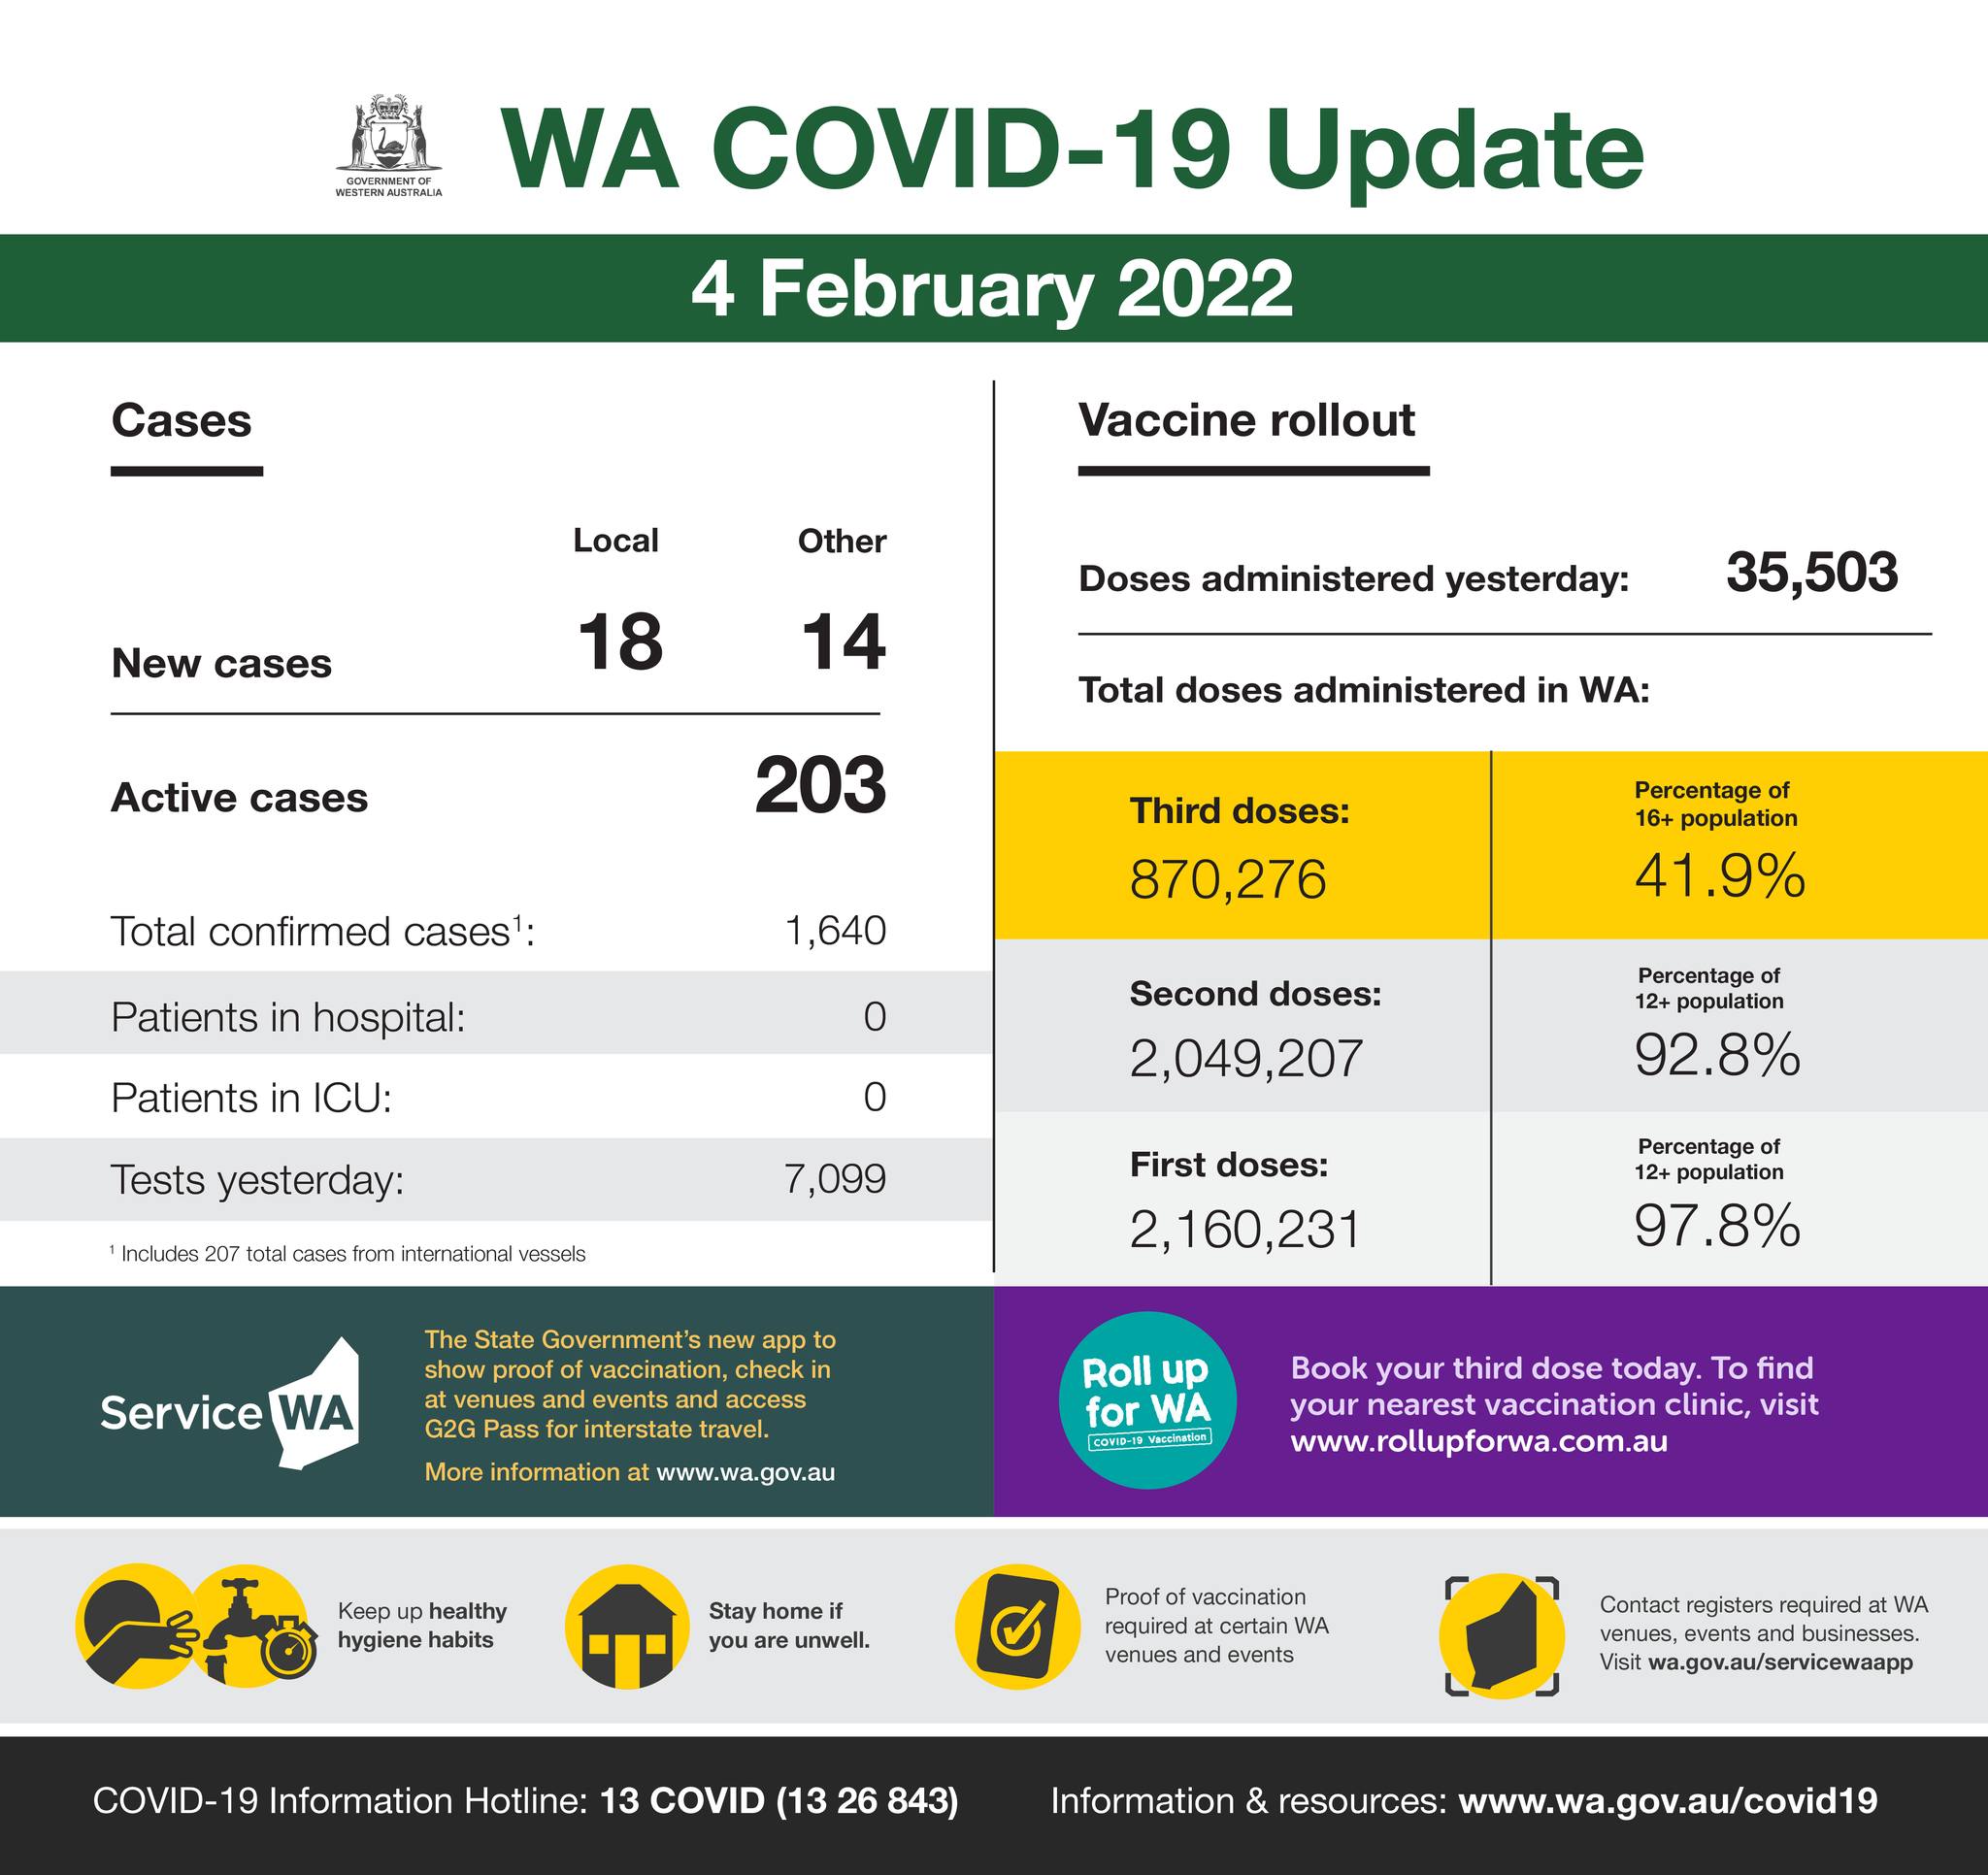 May be an image of text that says 'ÛI Cases WA COVID-19 Update 4 February 2022 Local Vaccine rollout Other New cases 18 14 Active cases yesterday: Total doses administered 35,503 203 Total confirmed cases1 WA: Patients in hospital: Third doses: 870,276 1,640 Patients in ICU: 0 +population 41.9% Tests yesterday: 0 Second doses: 2,049,207 Includes total cases 7,099 vessels Percentage 12+population 92.8% First doses: 2,160,231 Service WA Percentag access 97.8% Roll WA Keepu healthy Book your third dose today. find clinic, visit www.rollupforwa.com.au Stay home you unwell. events COVID 19 Information Hotline: 13 COVID (13 26 843) Contact atWA wa.gov.au/servicewaapp Information & resources: www.wa.gov.au/covid19'